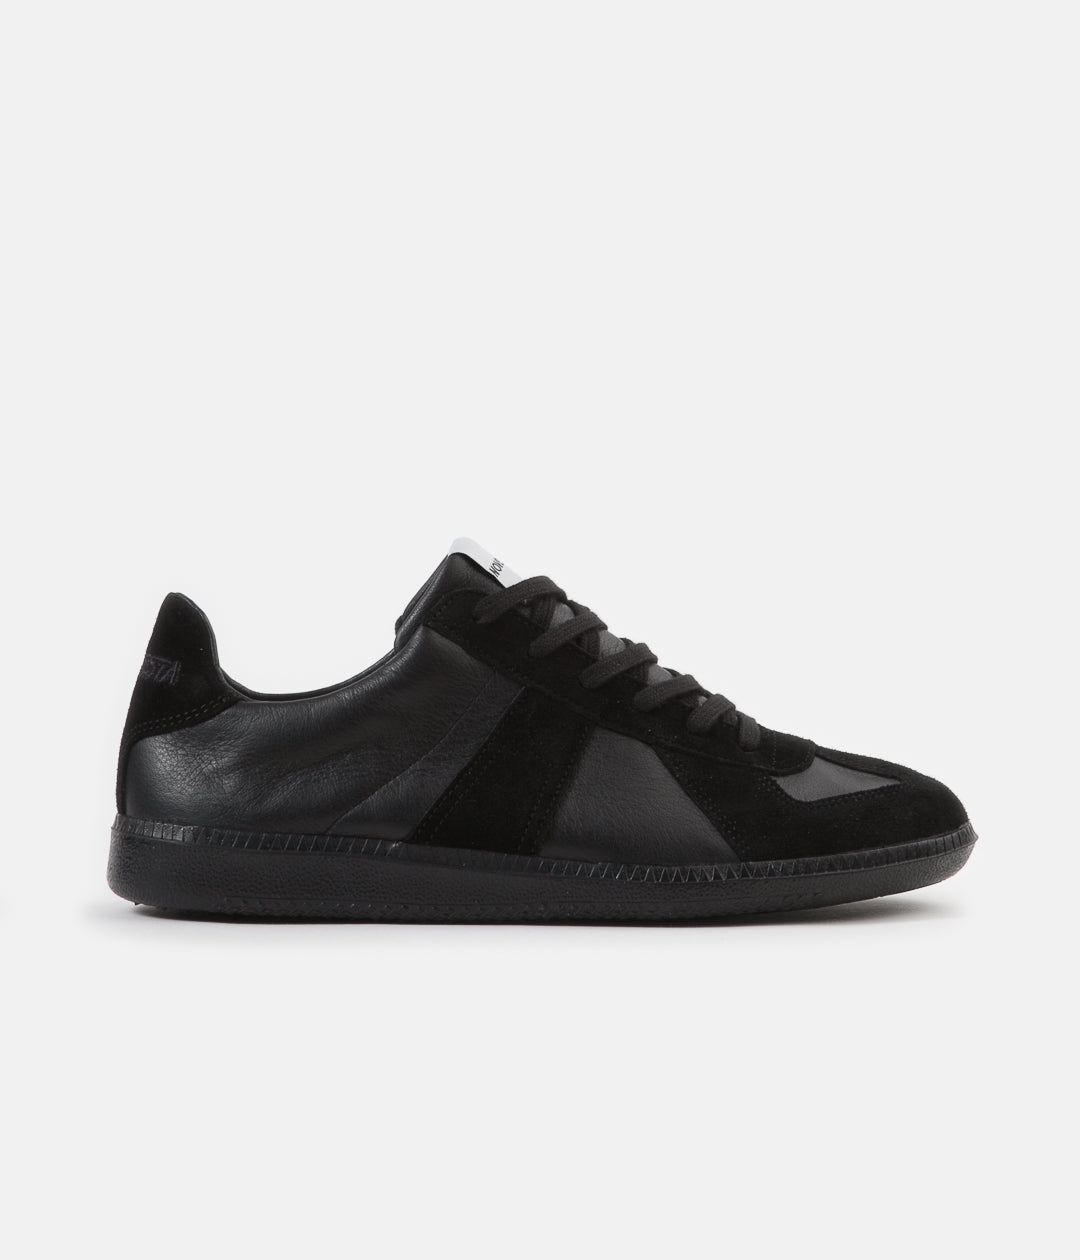 all black trainer shoes